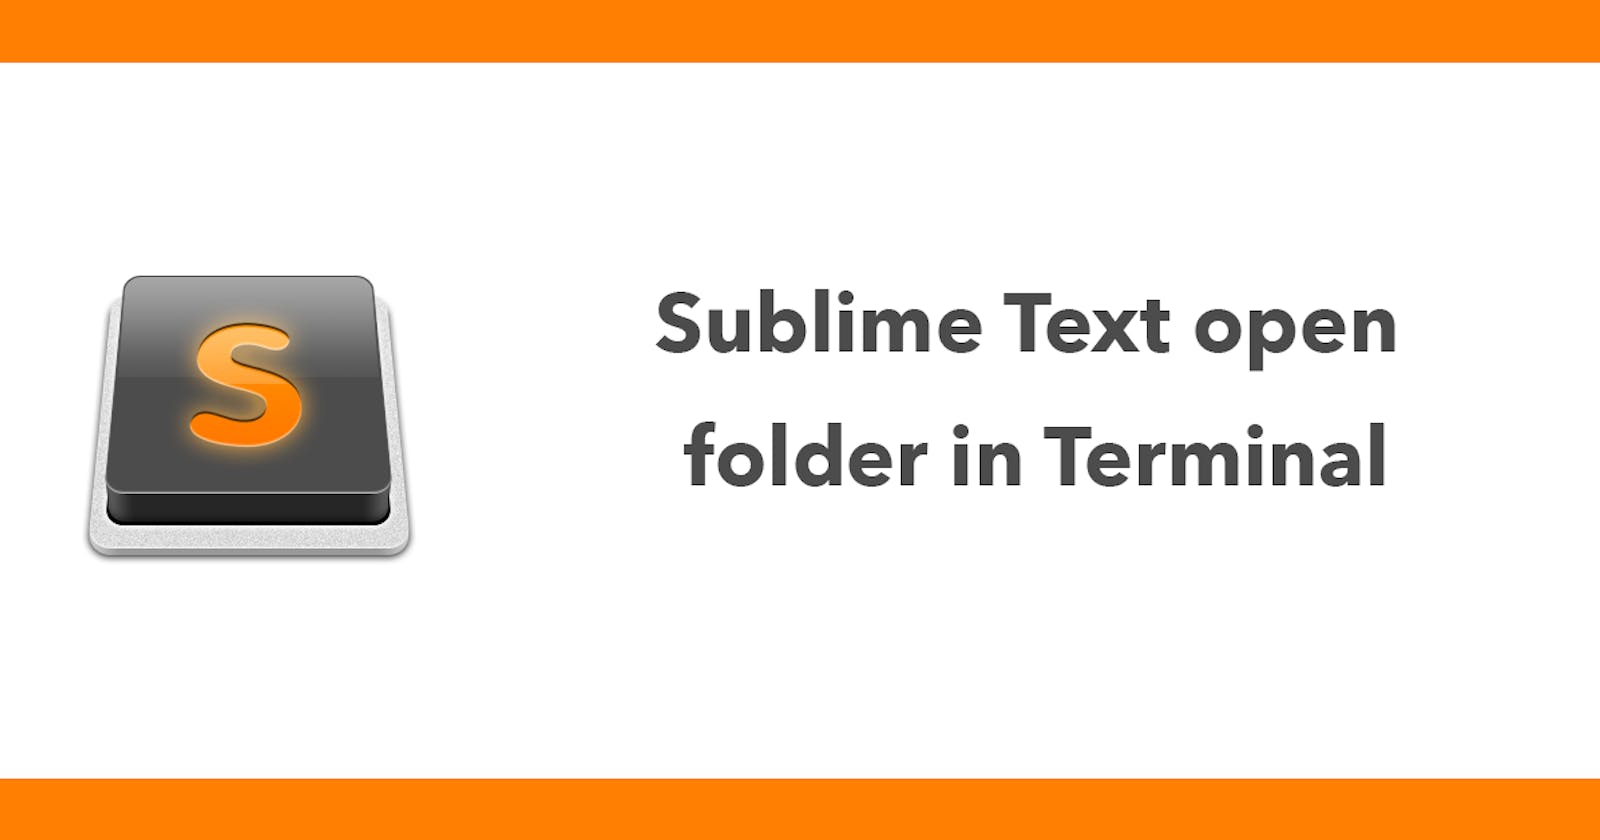 Sublime Text open folder in Terminal